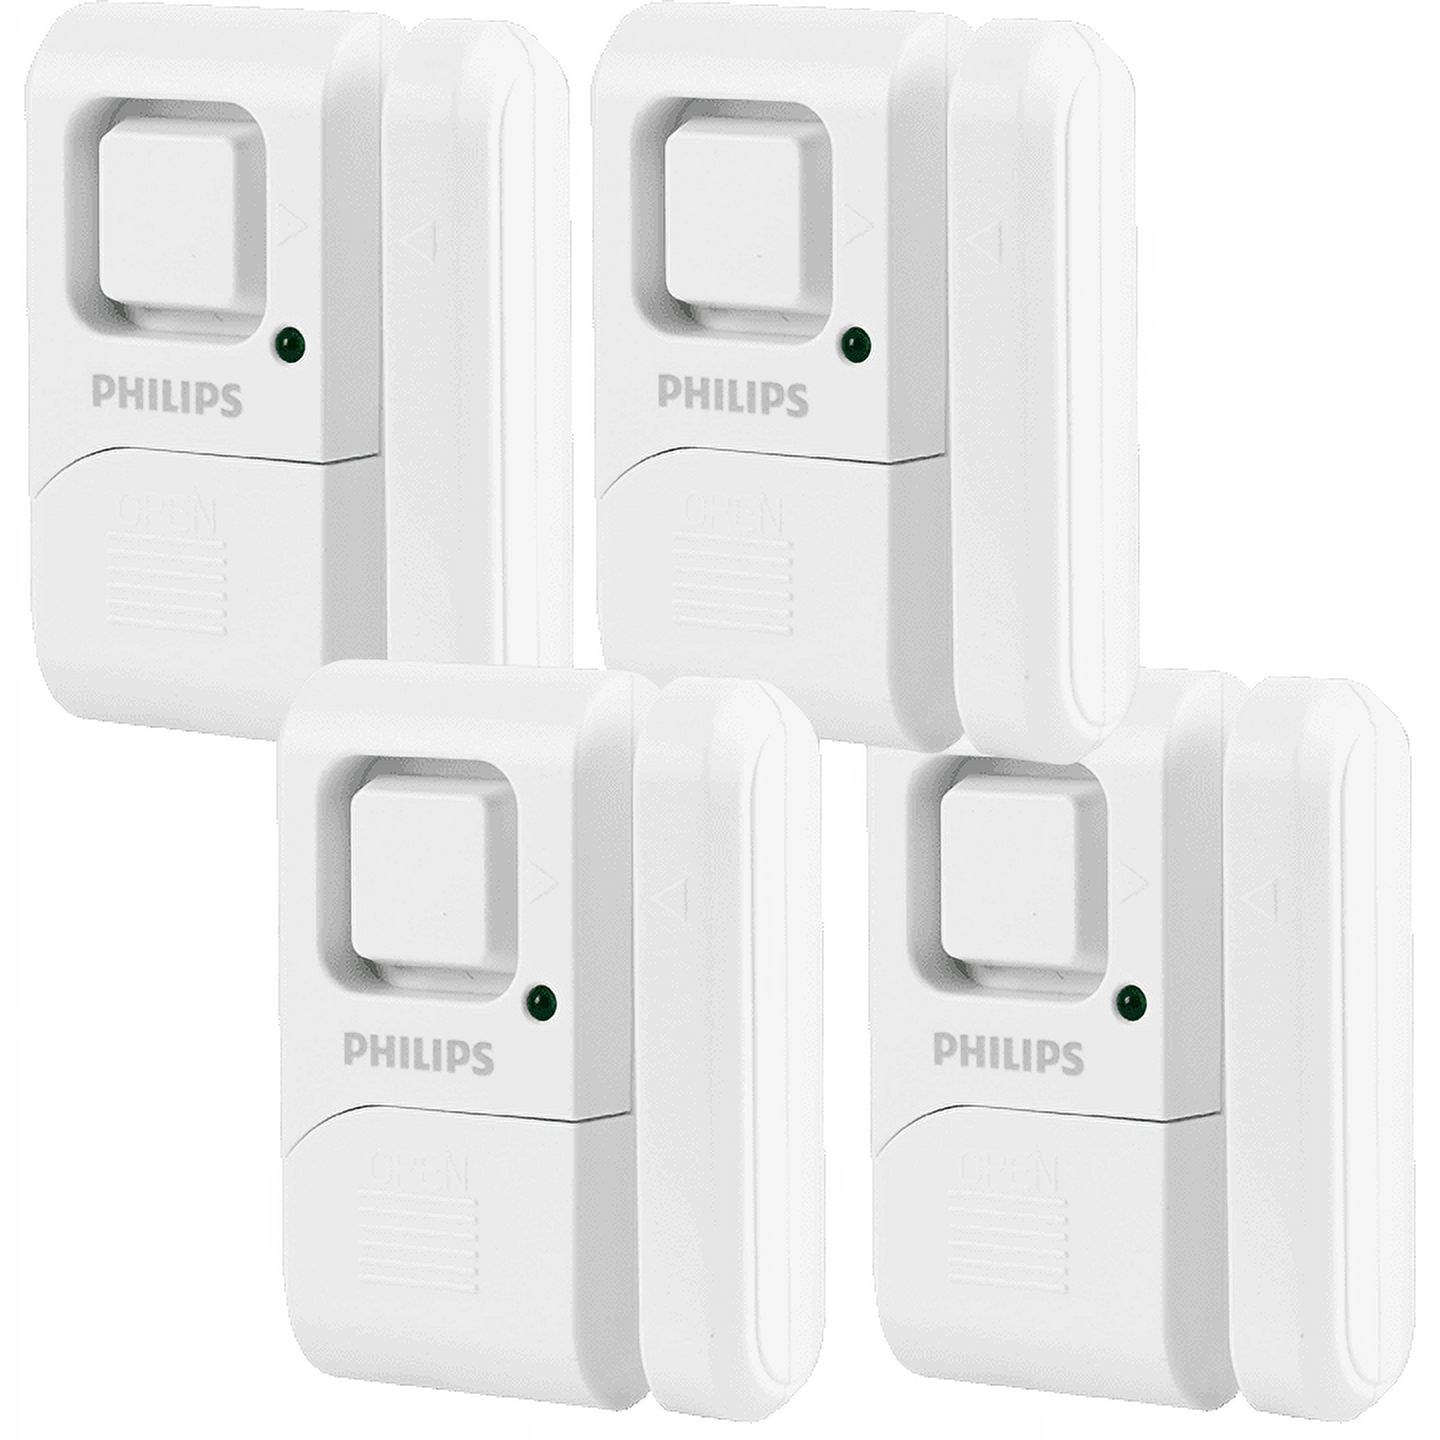 Philips Personal Security Window and Door Alarm, 4-Pack, White - image 1 of 9